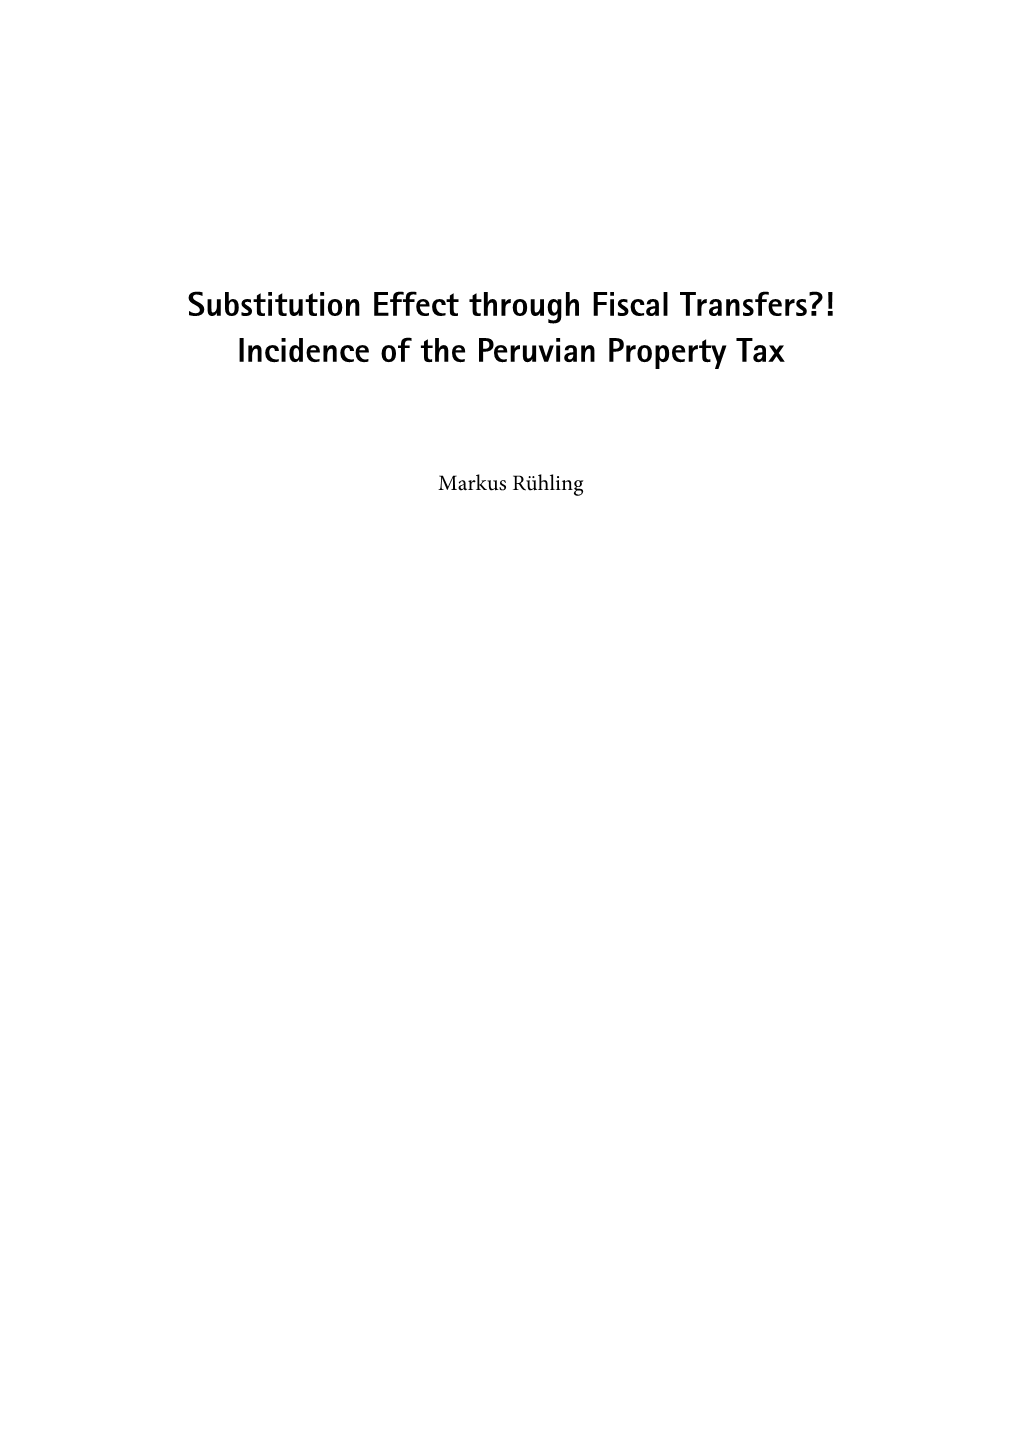 Substitution Effect Through Fiscal Transfers?! Incidence of the Peruvian Property Tax